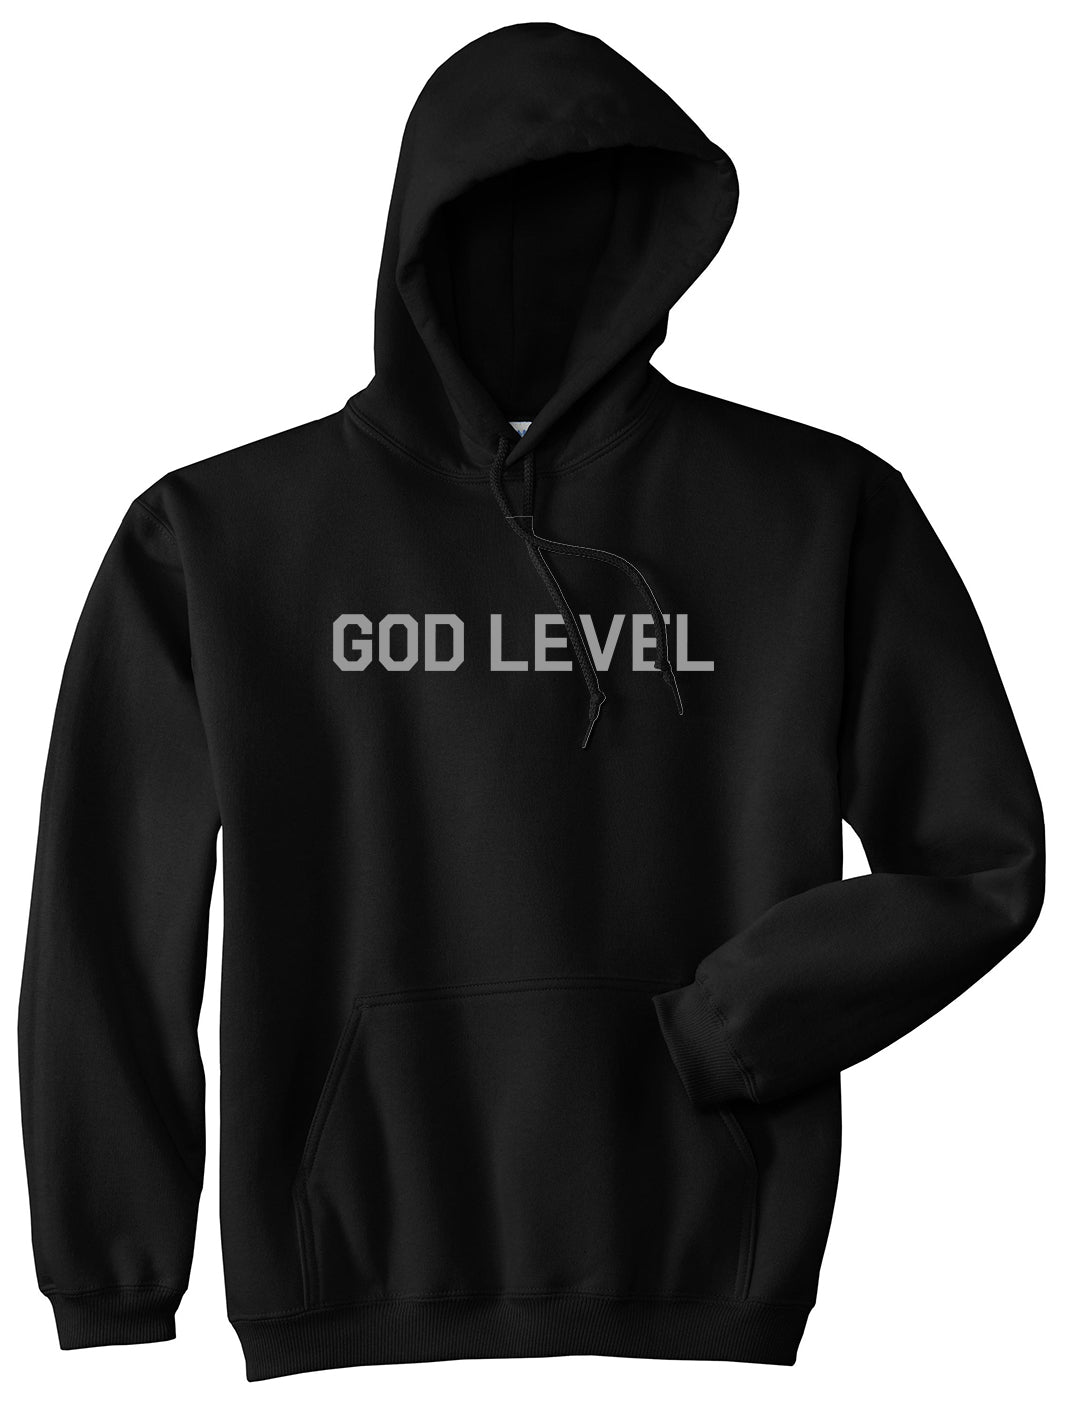 God Level Mens Pullover Hoodie Black by Kings Of NY